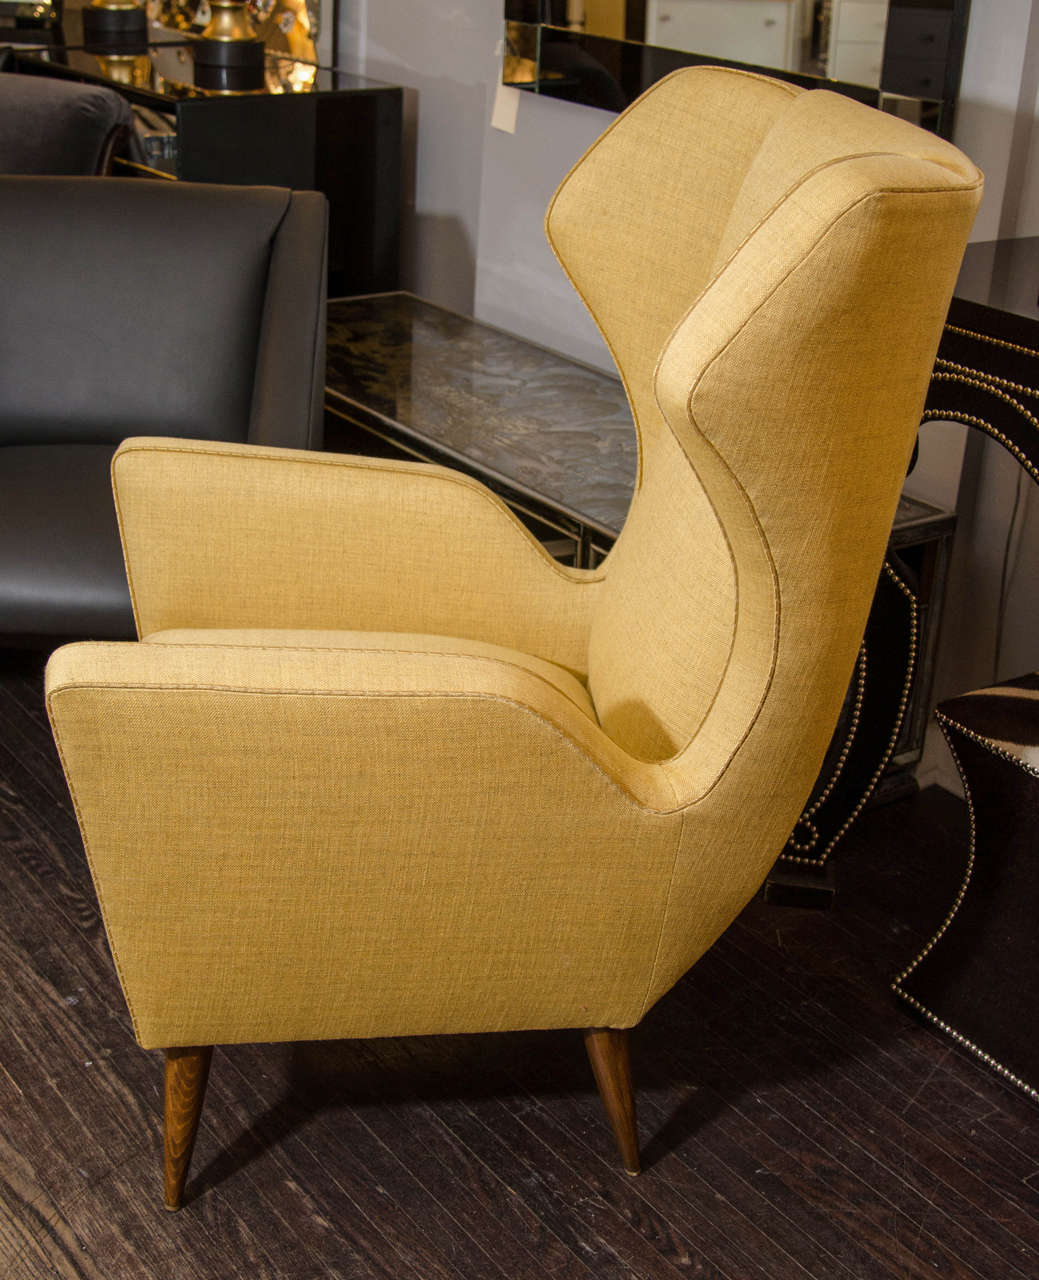 mustard yellow chair and ottoman